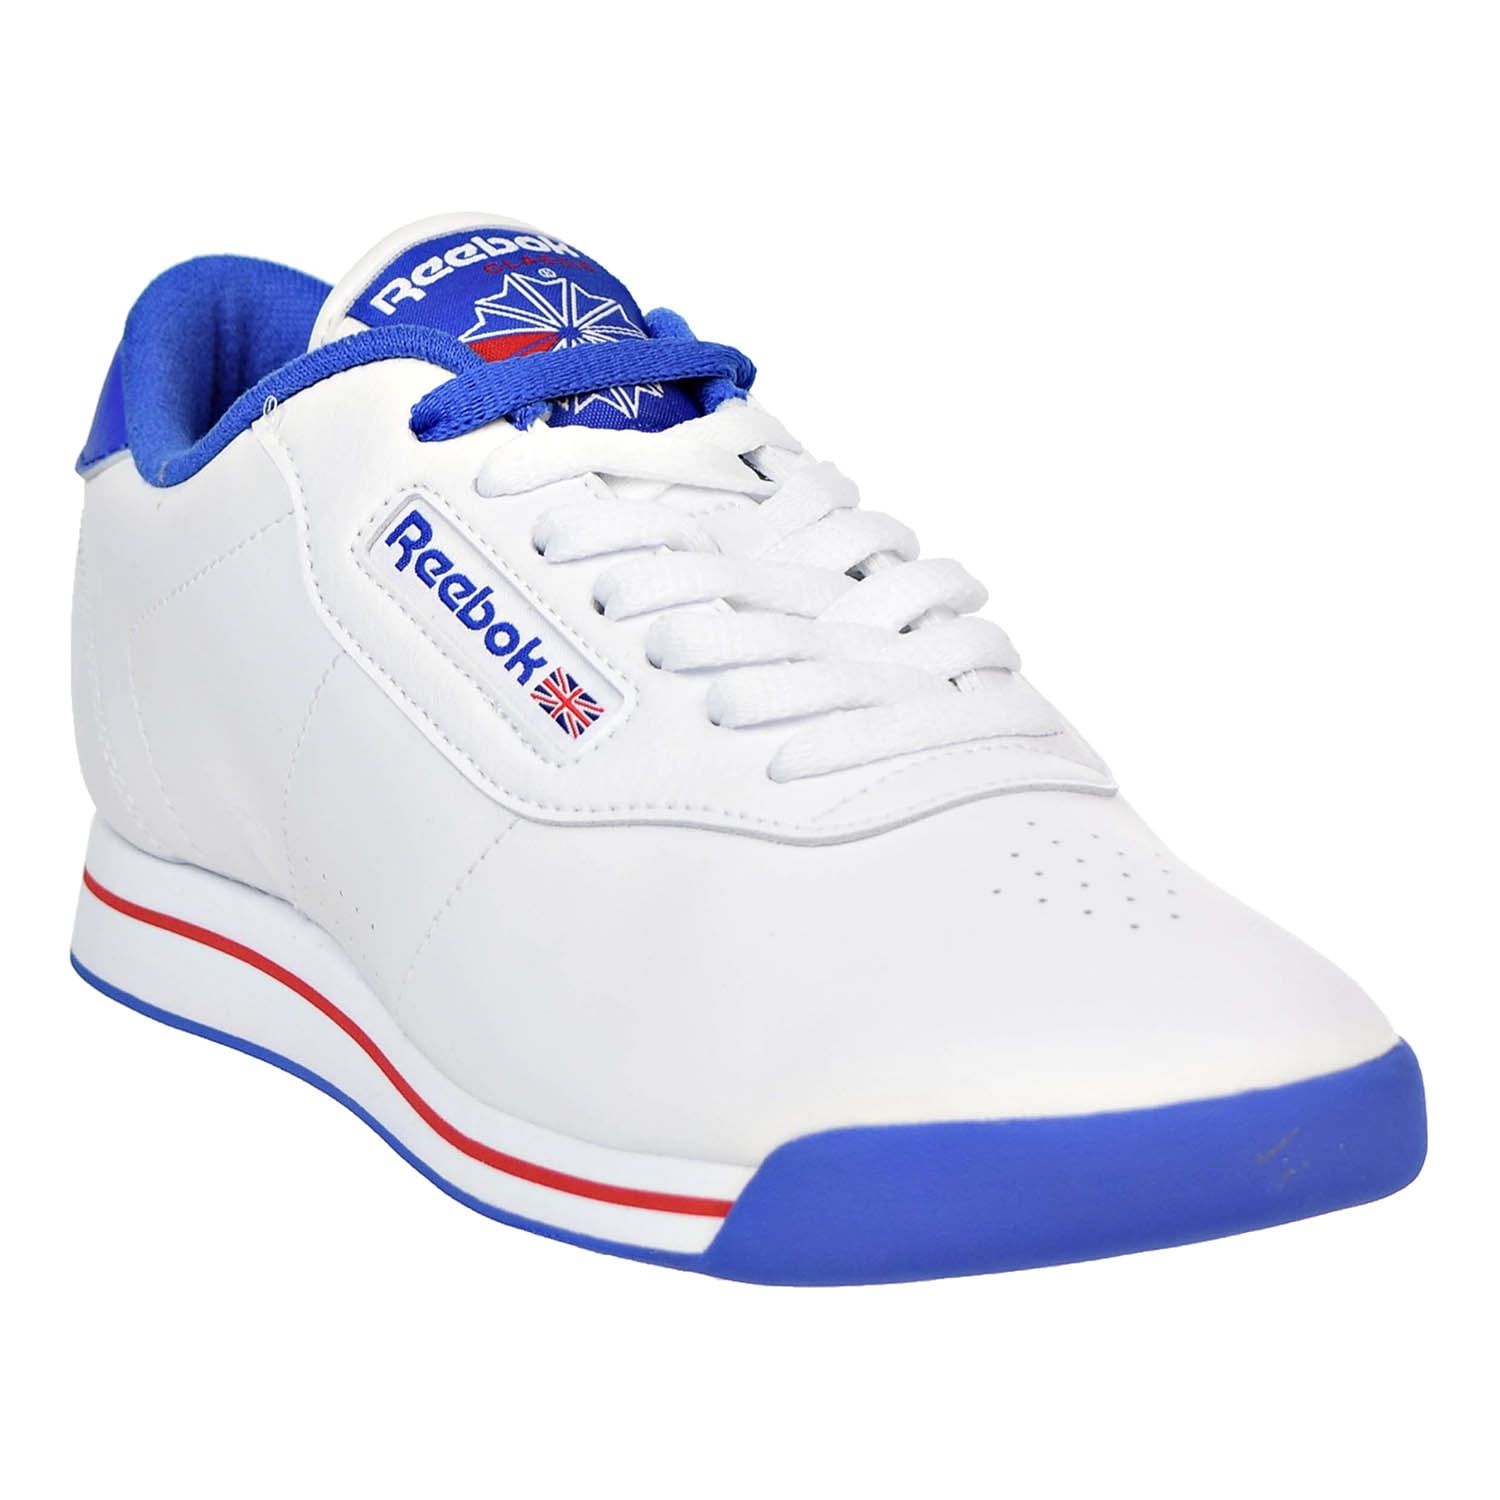 reebok classic blue and white